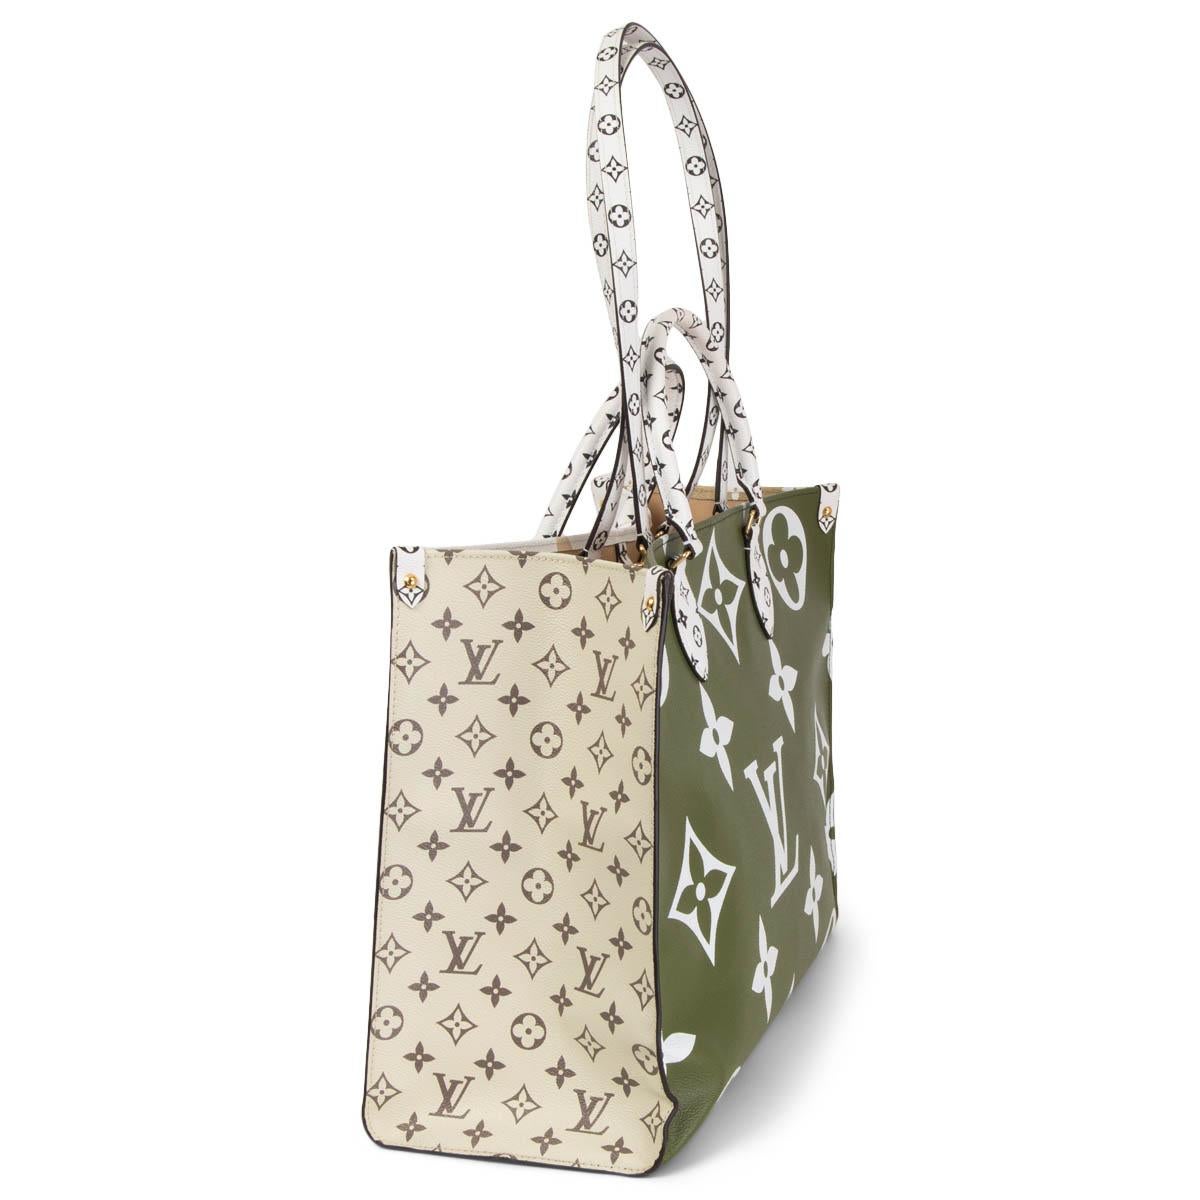 100% authentic Louis Vuitton Limited Edition 2019 Summer Capsule OnTheGo GM Tote Monogram Giant Reverse in khaki, cream and beige coated canvas. Lined in beige canvas with one zipper pocket and two patch pockets. Has been carried with faint marks on